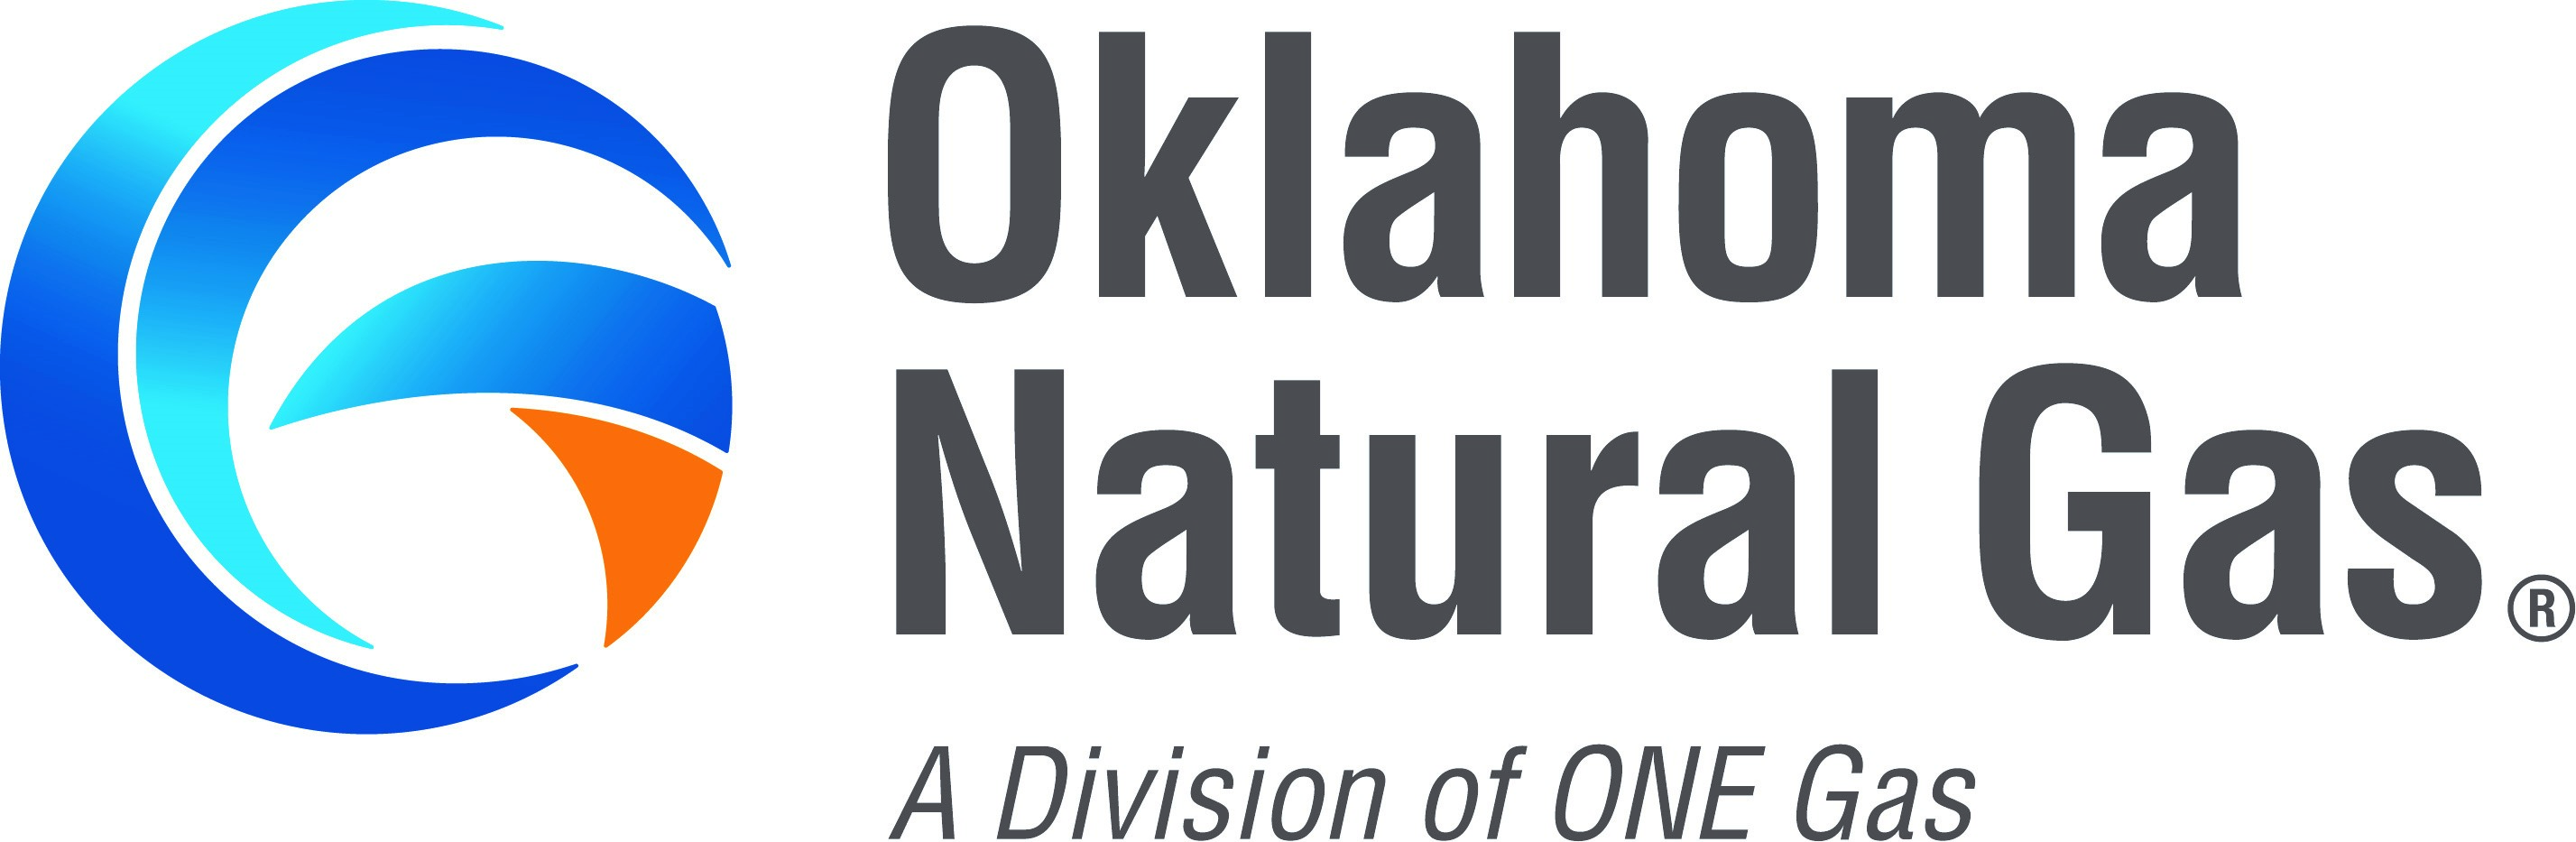 Oklahoma Natural Gas, A Division of ONE Gas